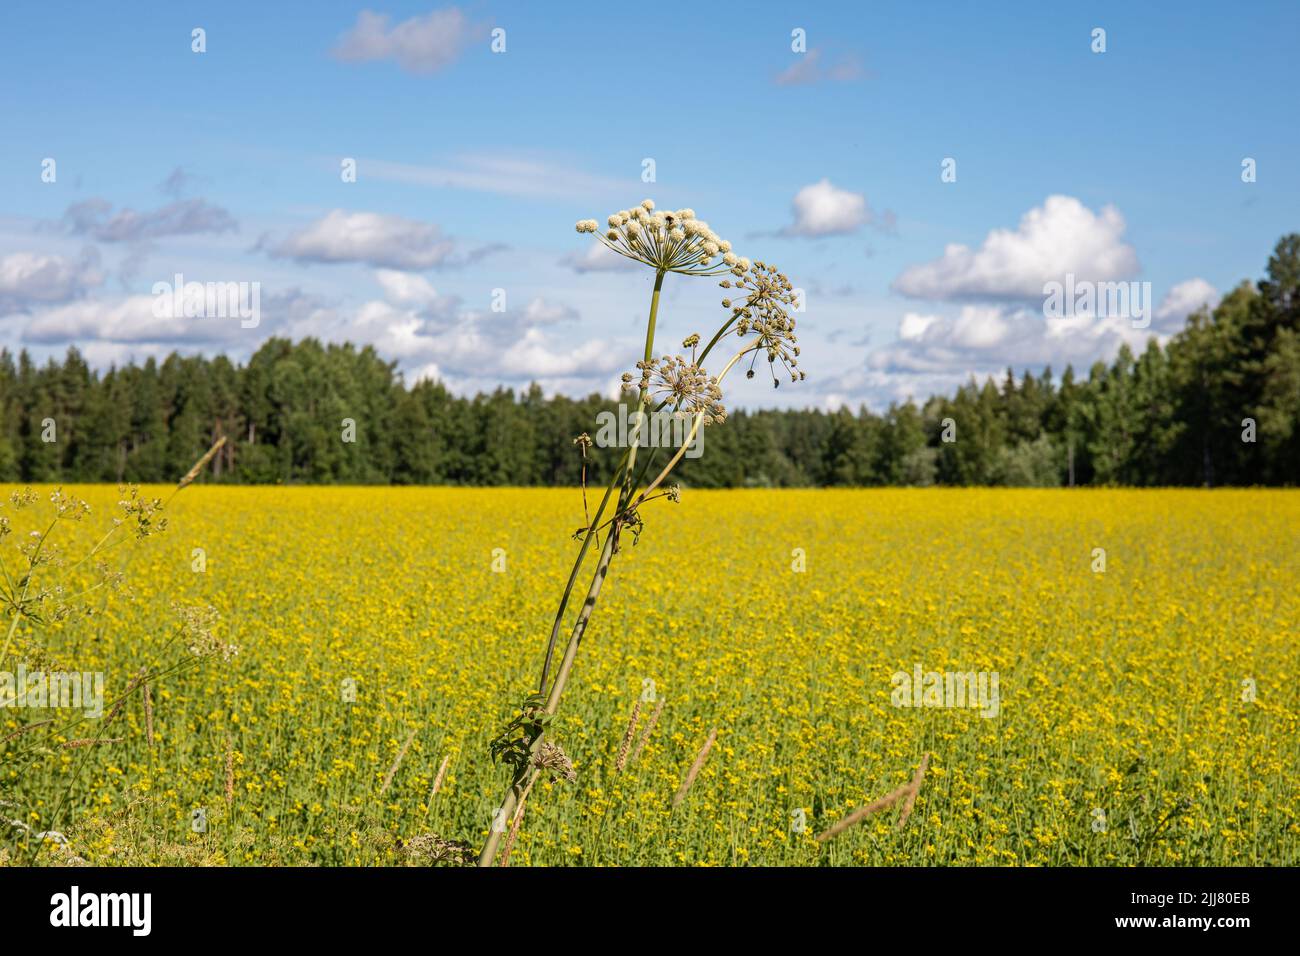 Wild angelica or Angelica sylvestris growing by canola field rural countryside of Orivesi, Finland Stock Photo